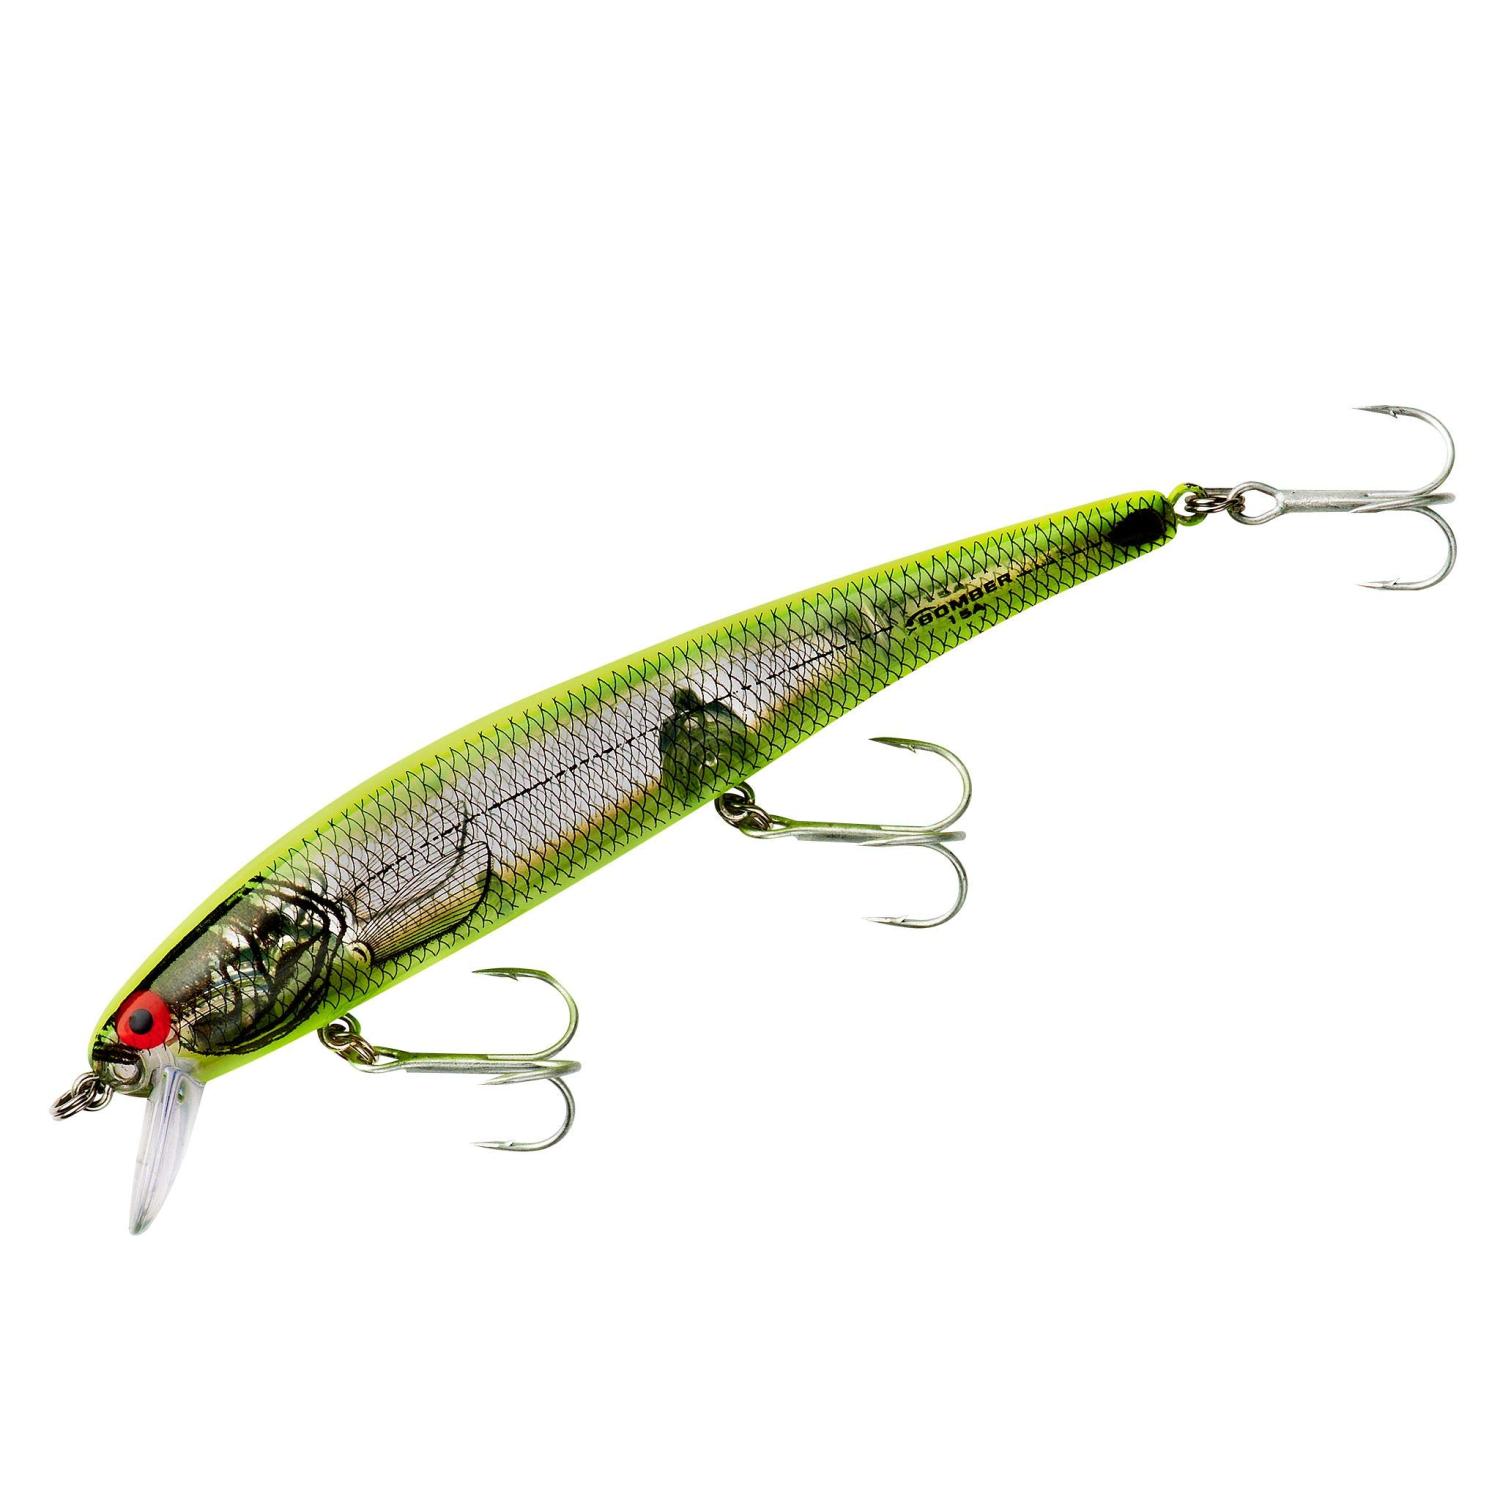 Buy Bomber Lures Long A B15A Slender Minnow Jerbait Fishing Lure